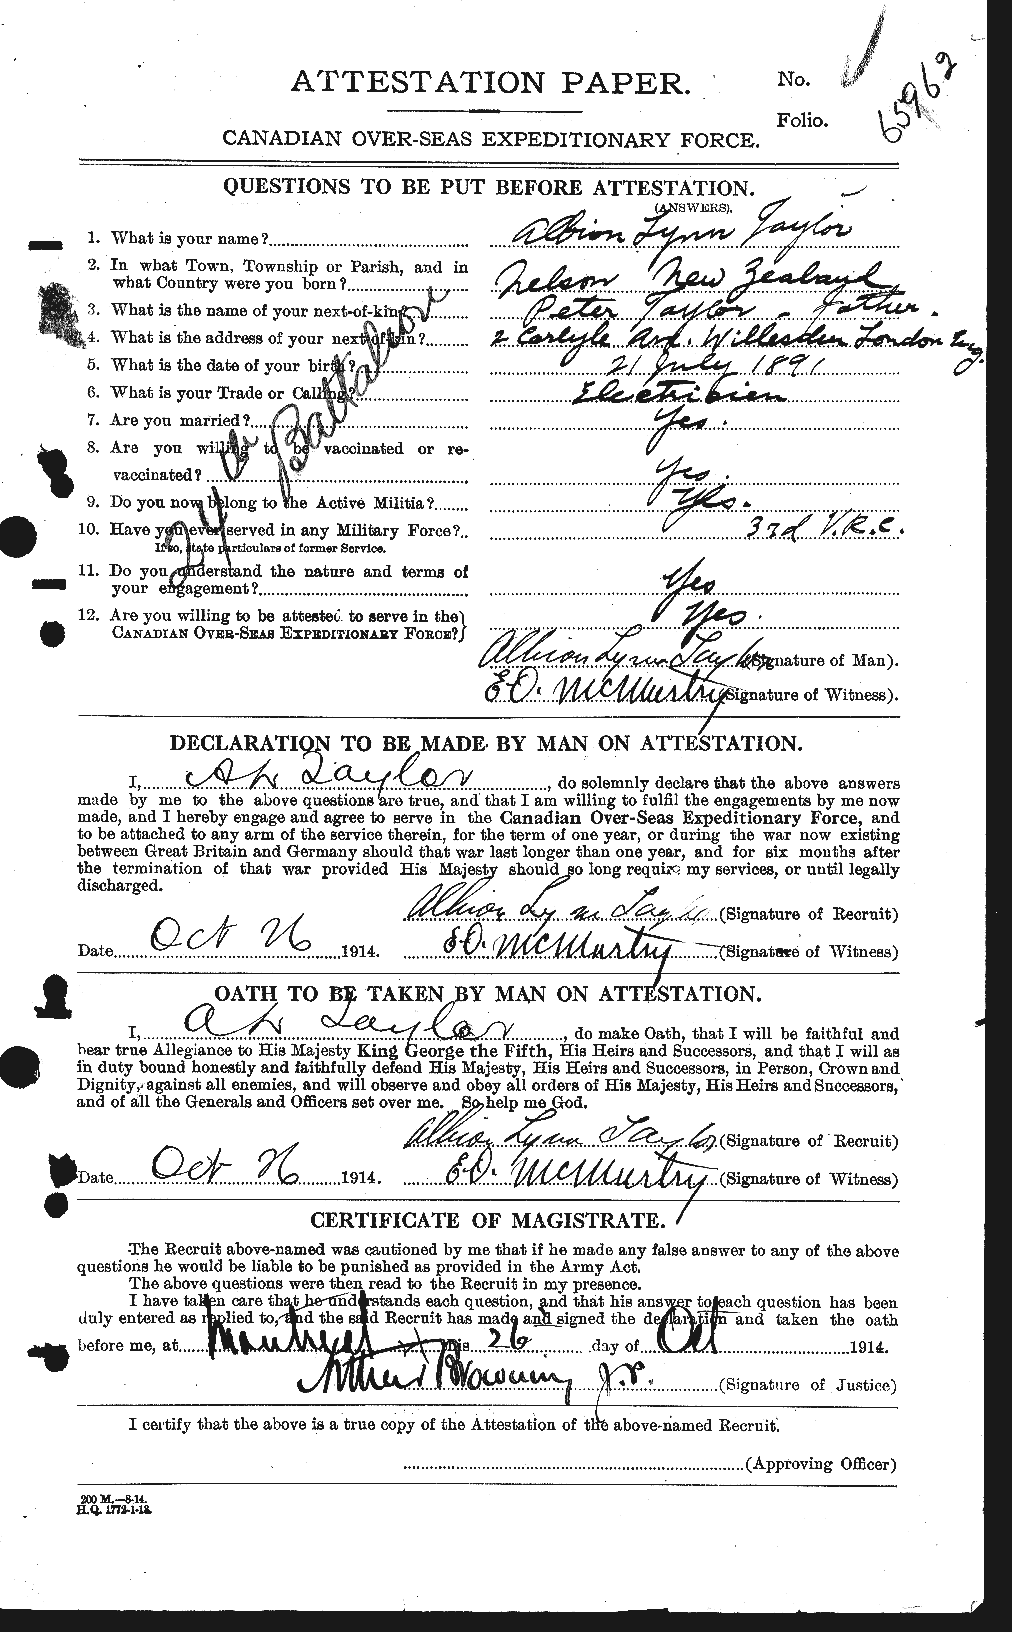 Personnel Records of the First World War - CEF 626129a